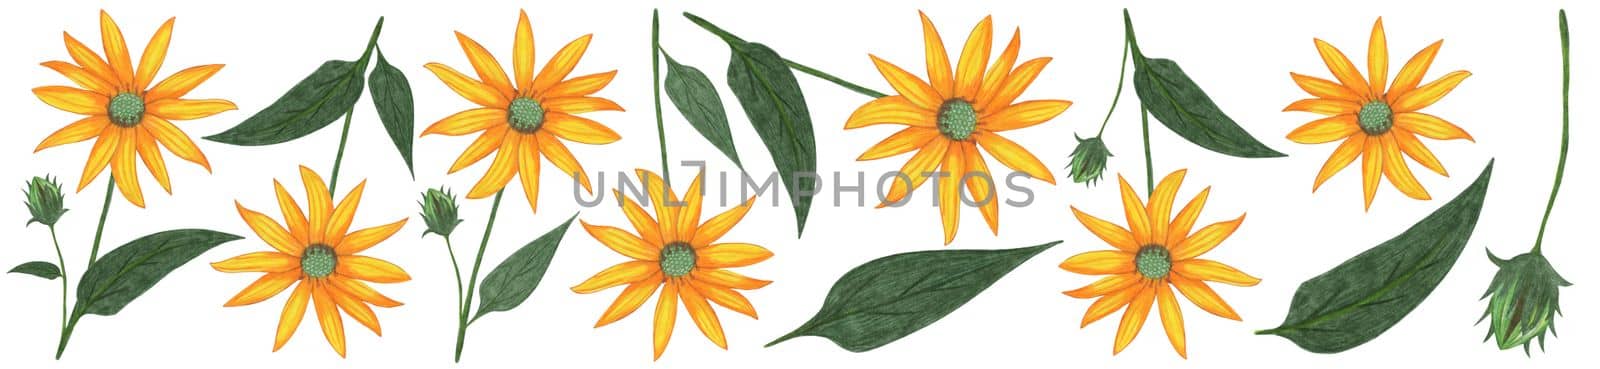 Set of Yellow Flowers with Green Leaves Isolated on White Background. Yellow Floral Element Drawn by Colored Pencil Collection.